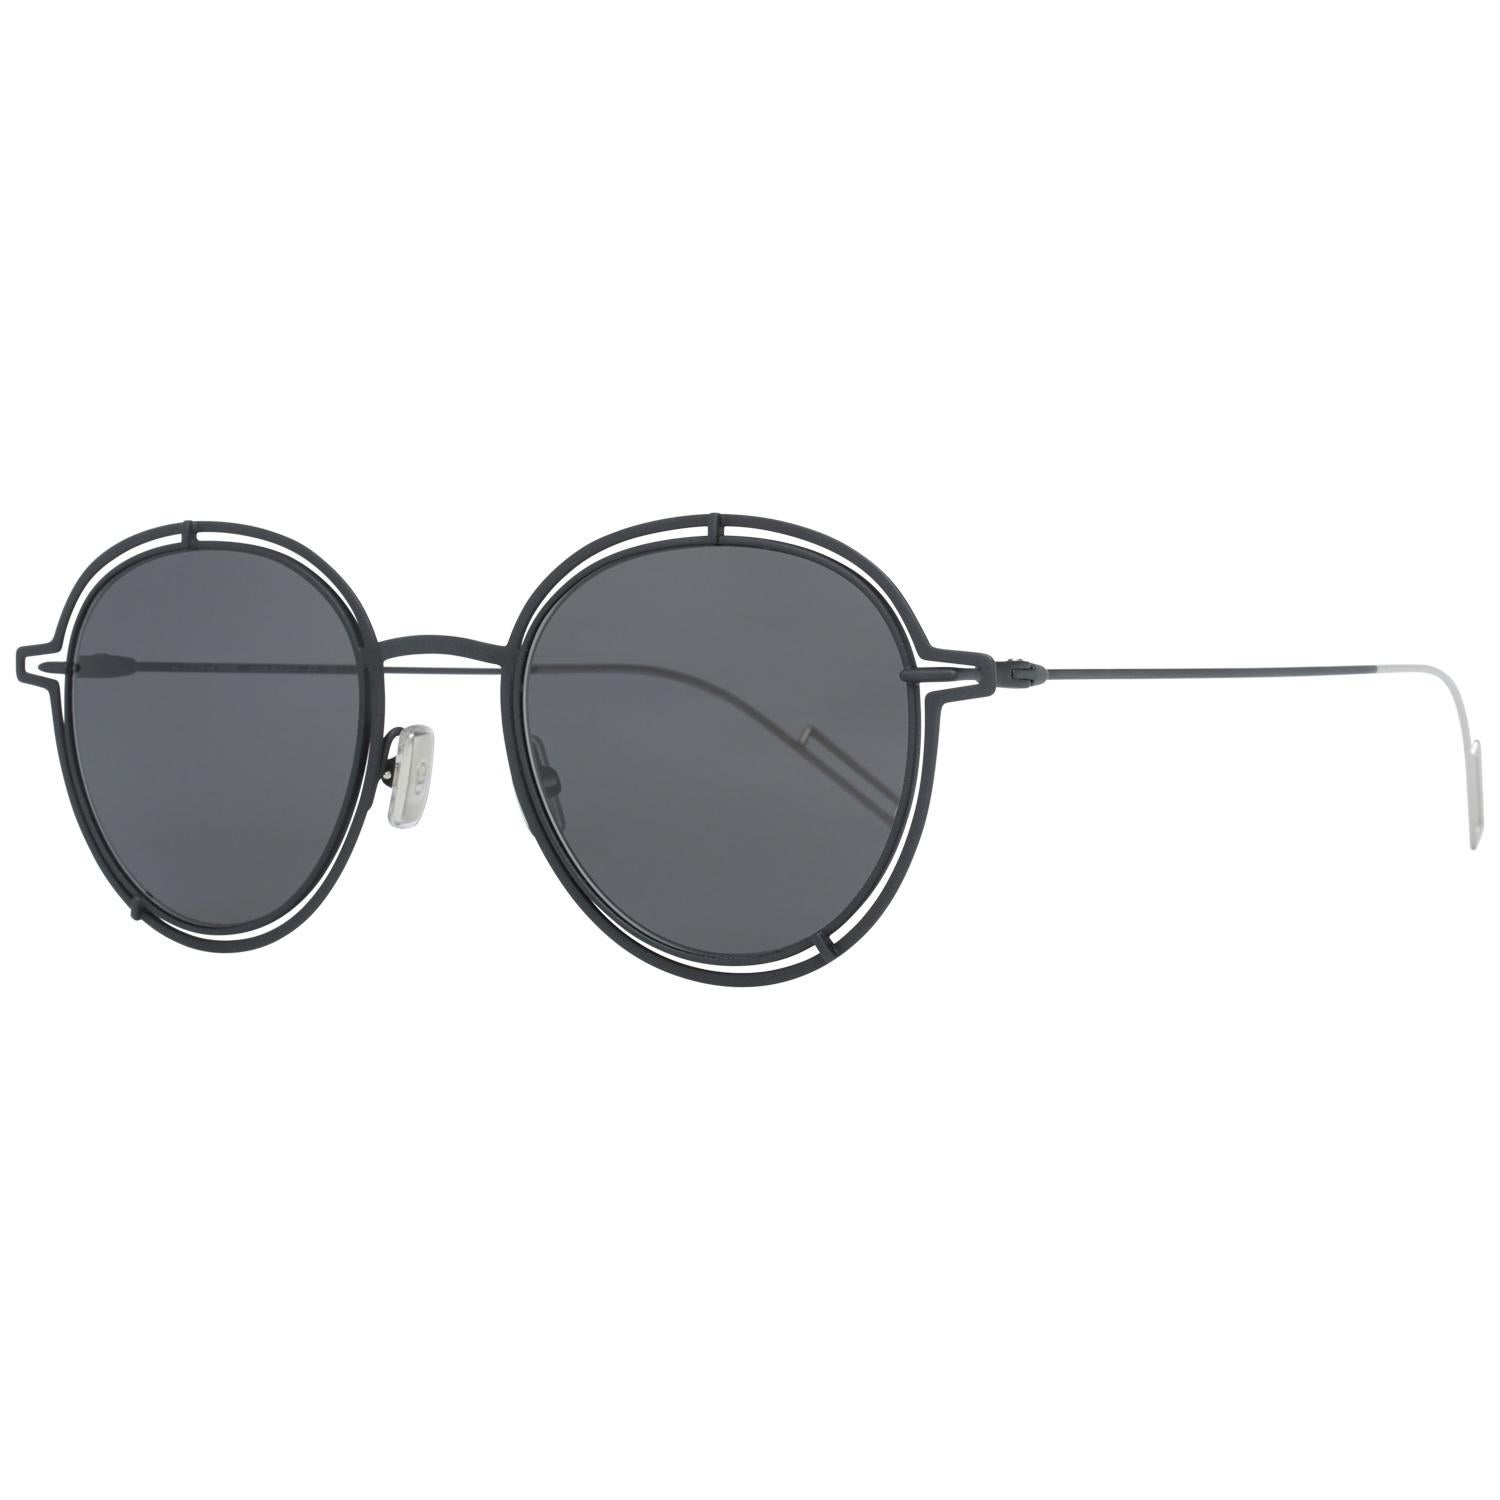 Details

MATERIAL: Metal

COLOR: Black

MODEL: DIOR0210S 49S8J

GENDER: Women

COUNTRY OF MANUFACTURE: Italy

TYPE: Sunglasses

ORIGINAL CASE?: Yes

STYLE: Round

OCCASION: Casual

FEATURES: Lightweight

LENS COLOR: Grey

LENS TECHNOLOGY: No